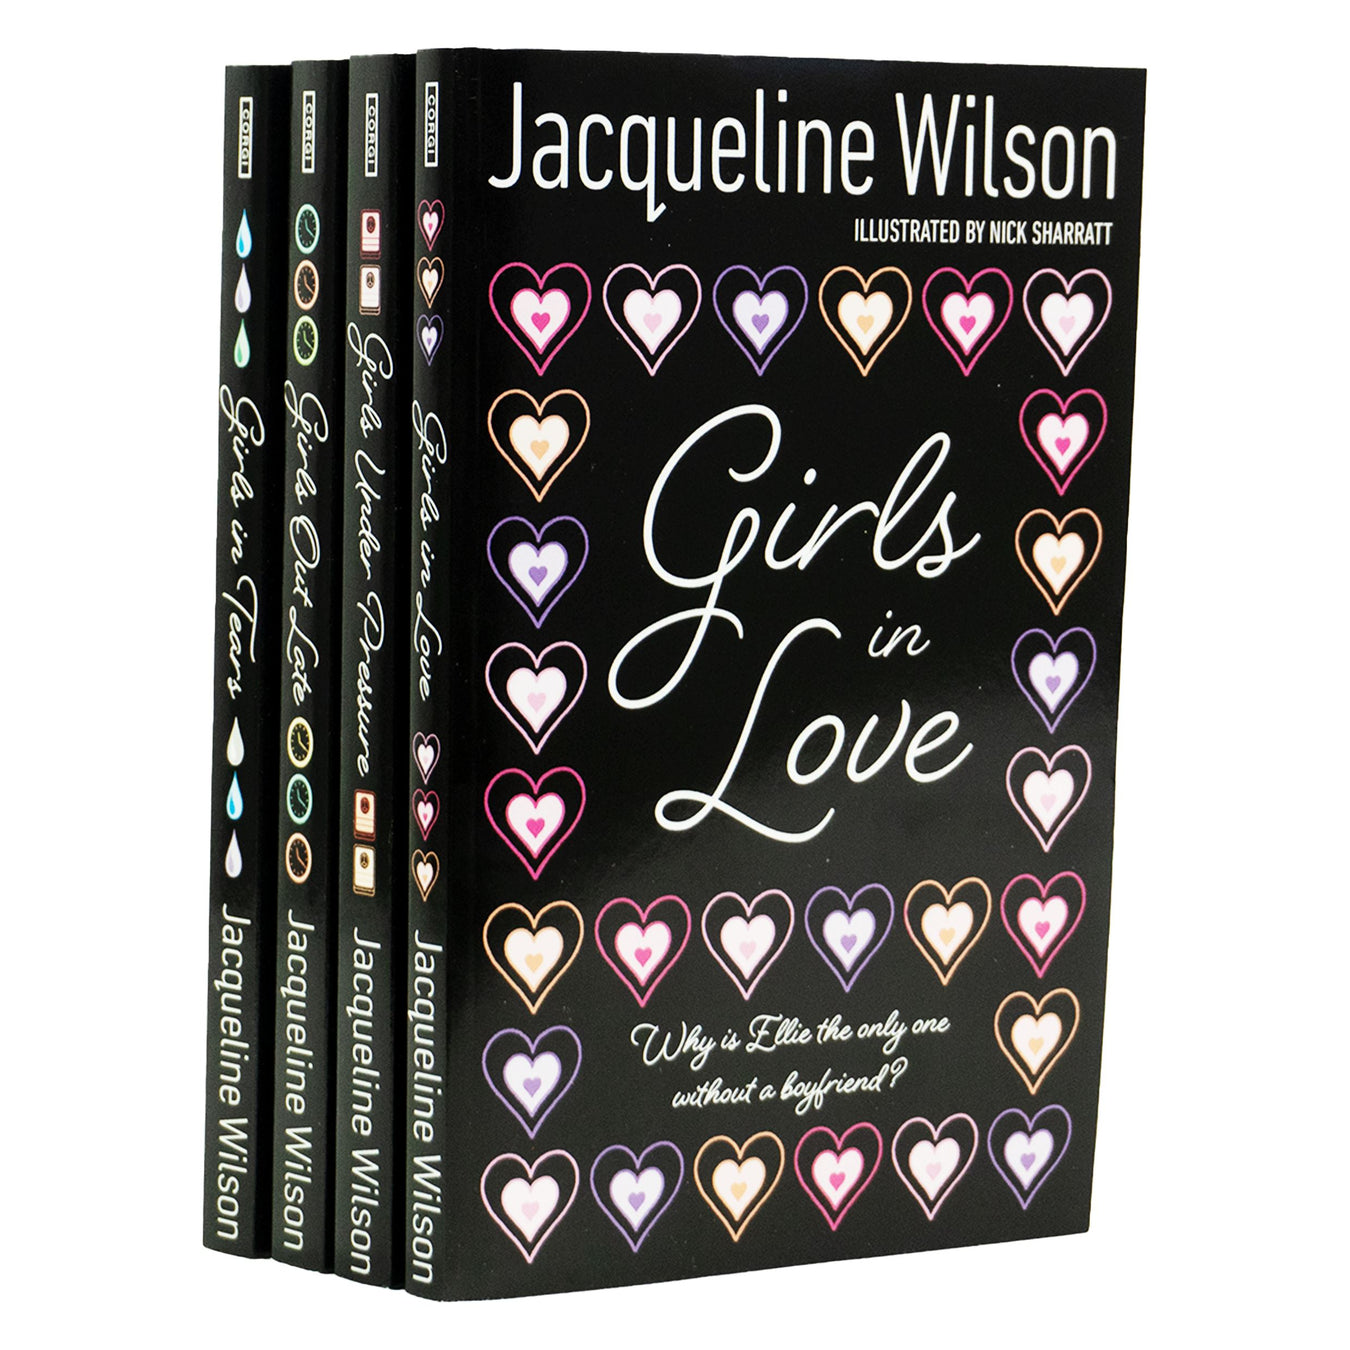 Girls Series By Jacqueline Wilson 4 Books Collection Set - Ages 12-17 - Paperback Young Adult Corgi Books